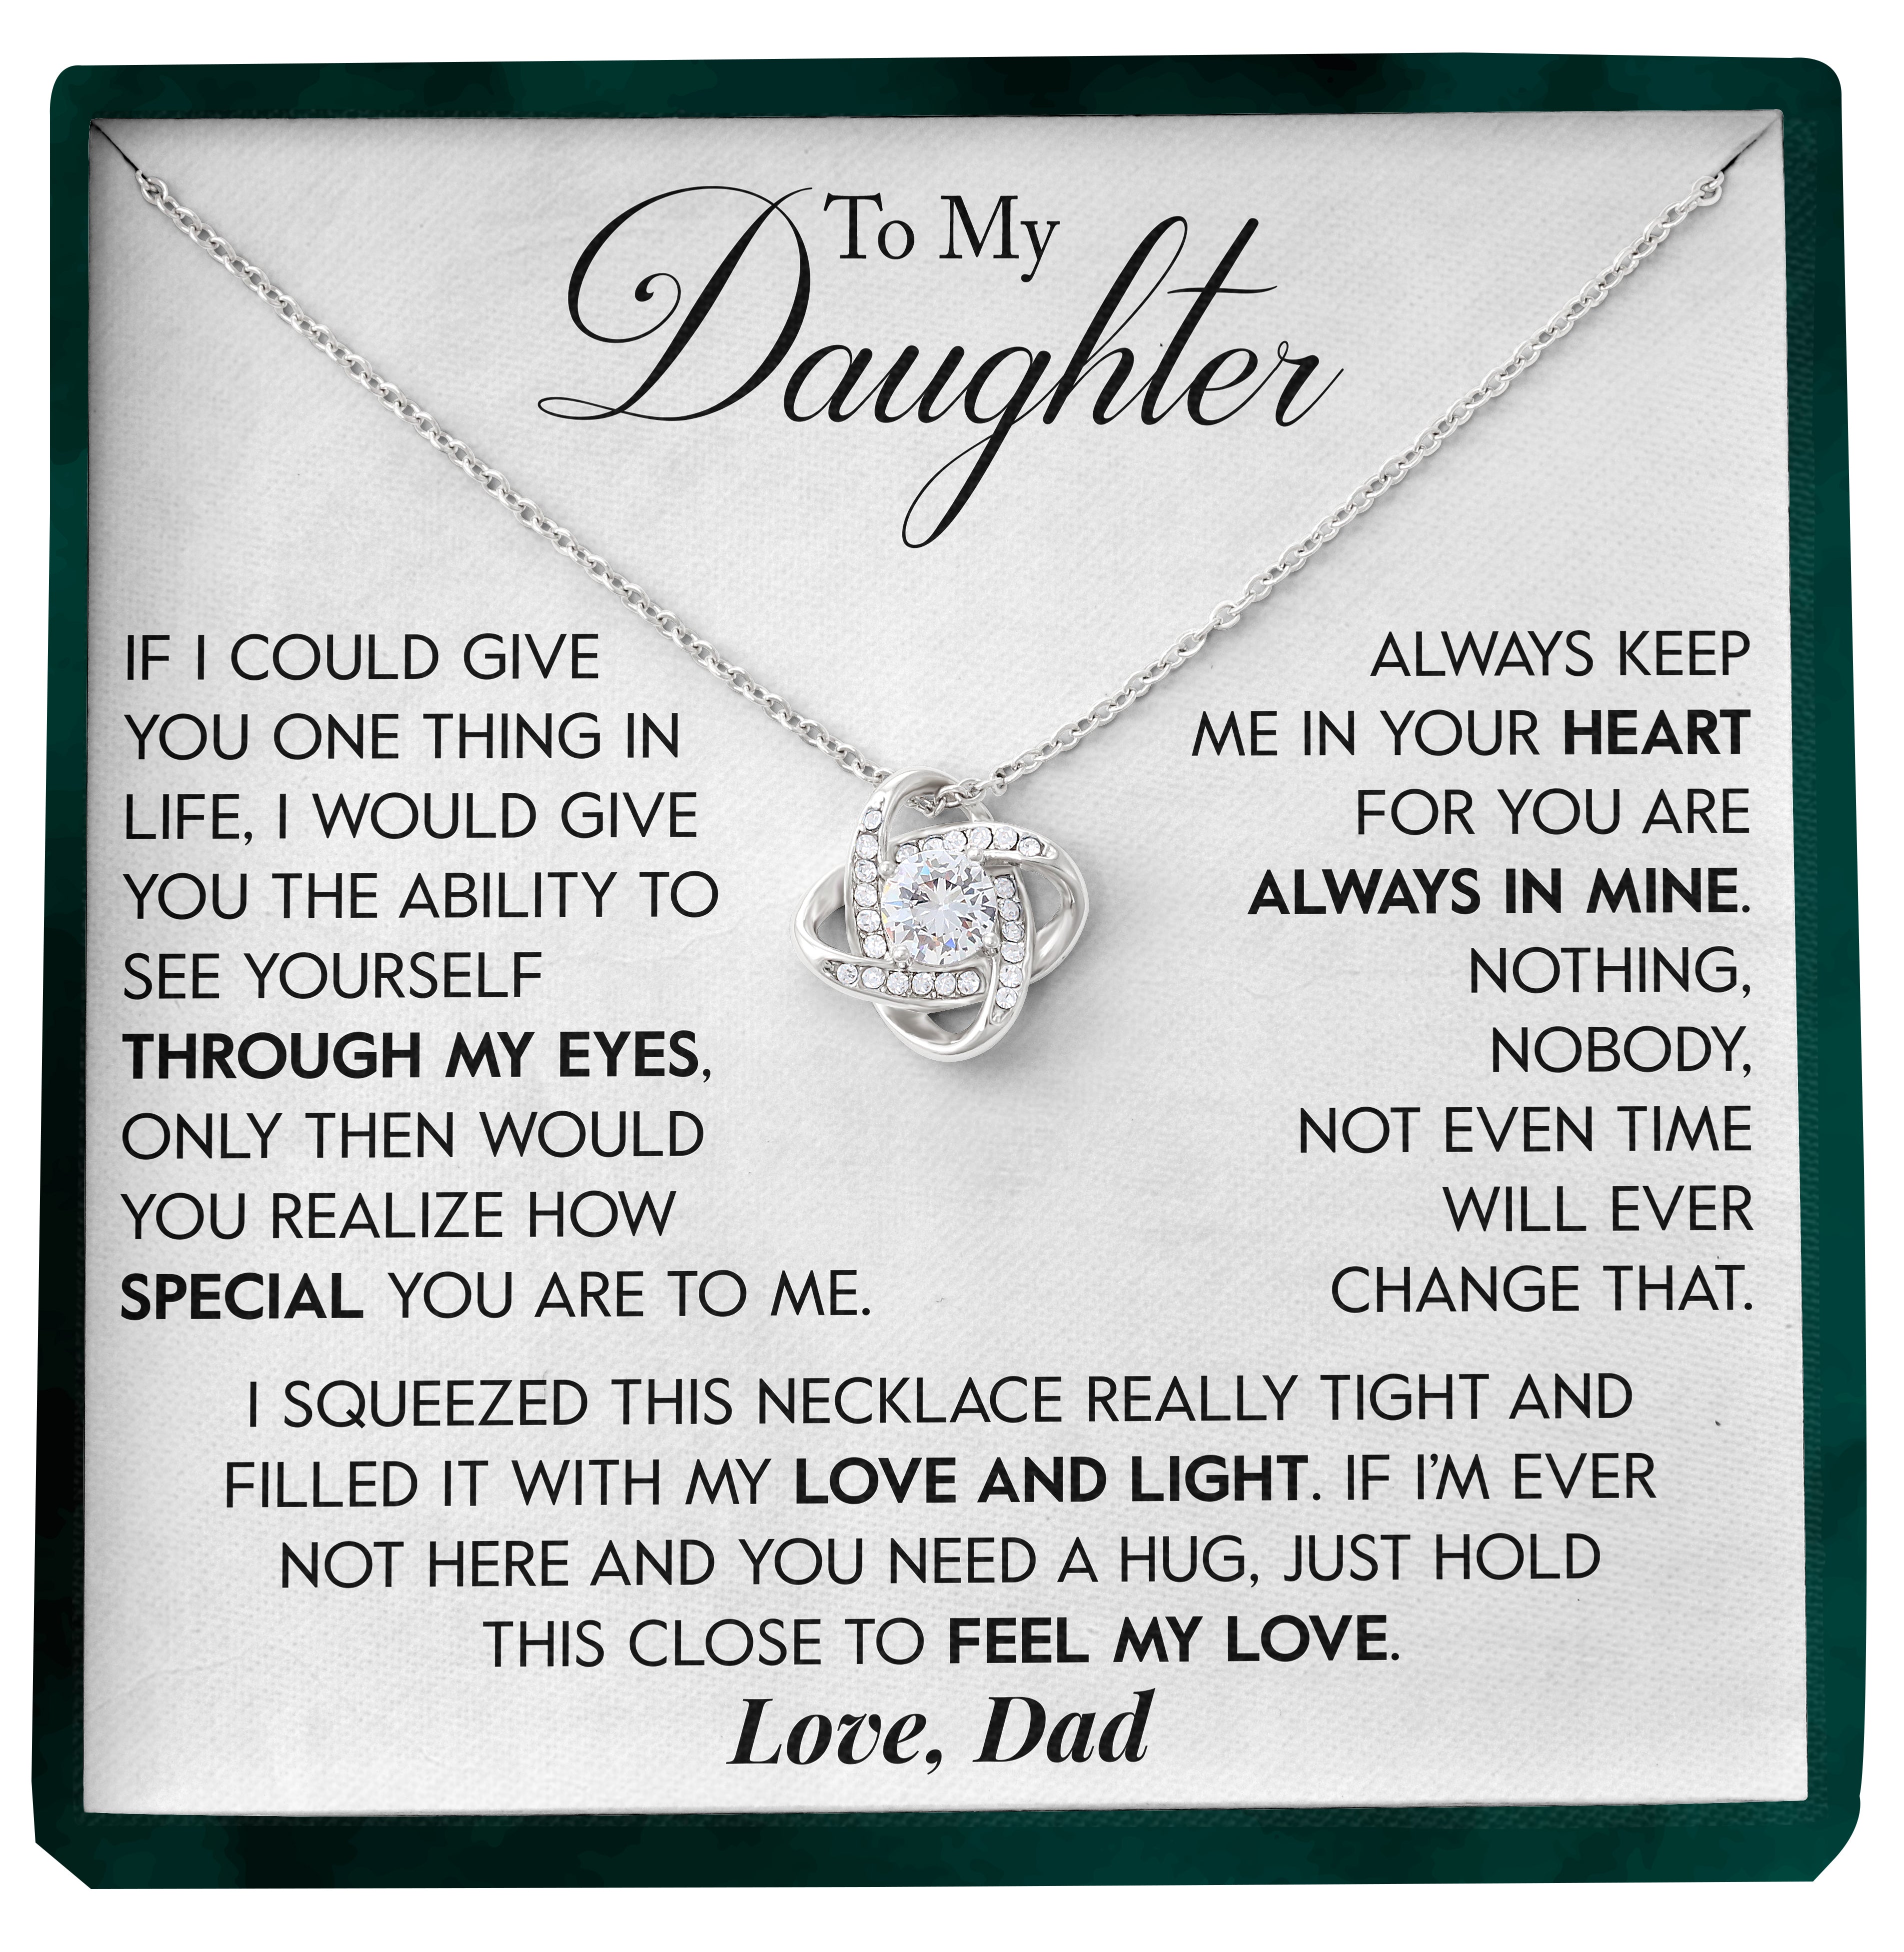 To My Daughter | "Not Even Time" | Love Knot Necklace